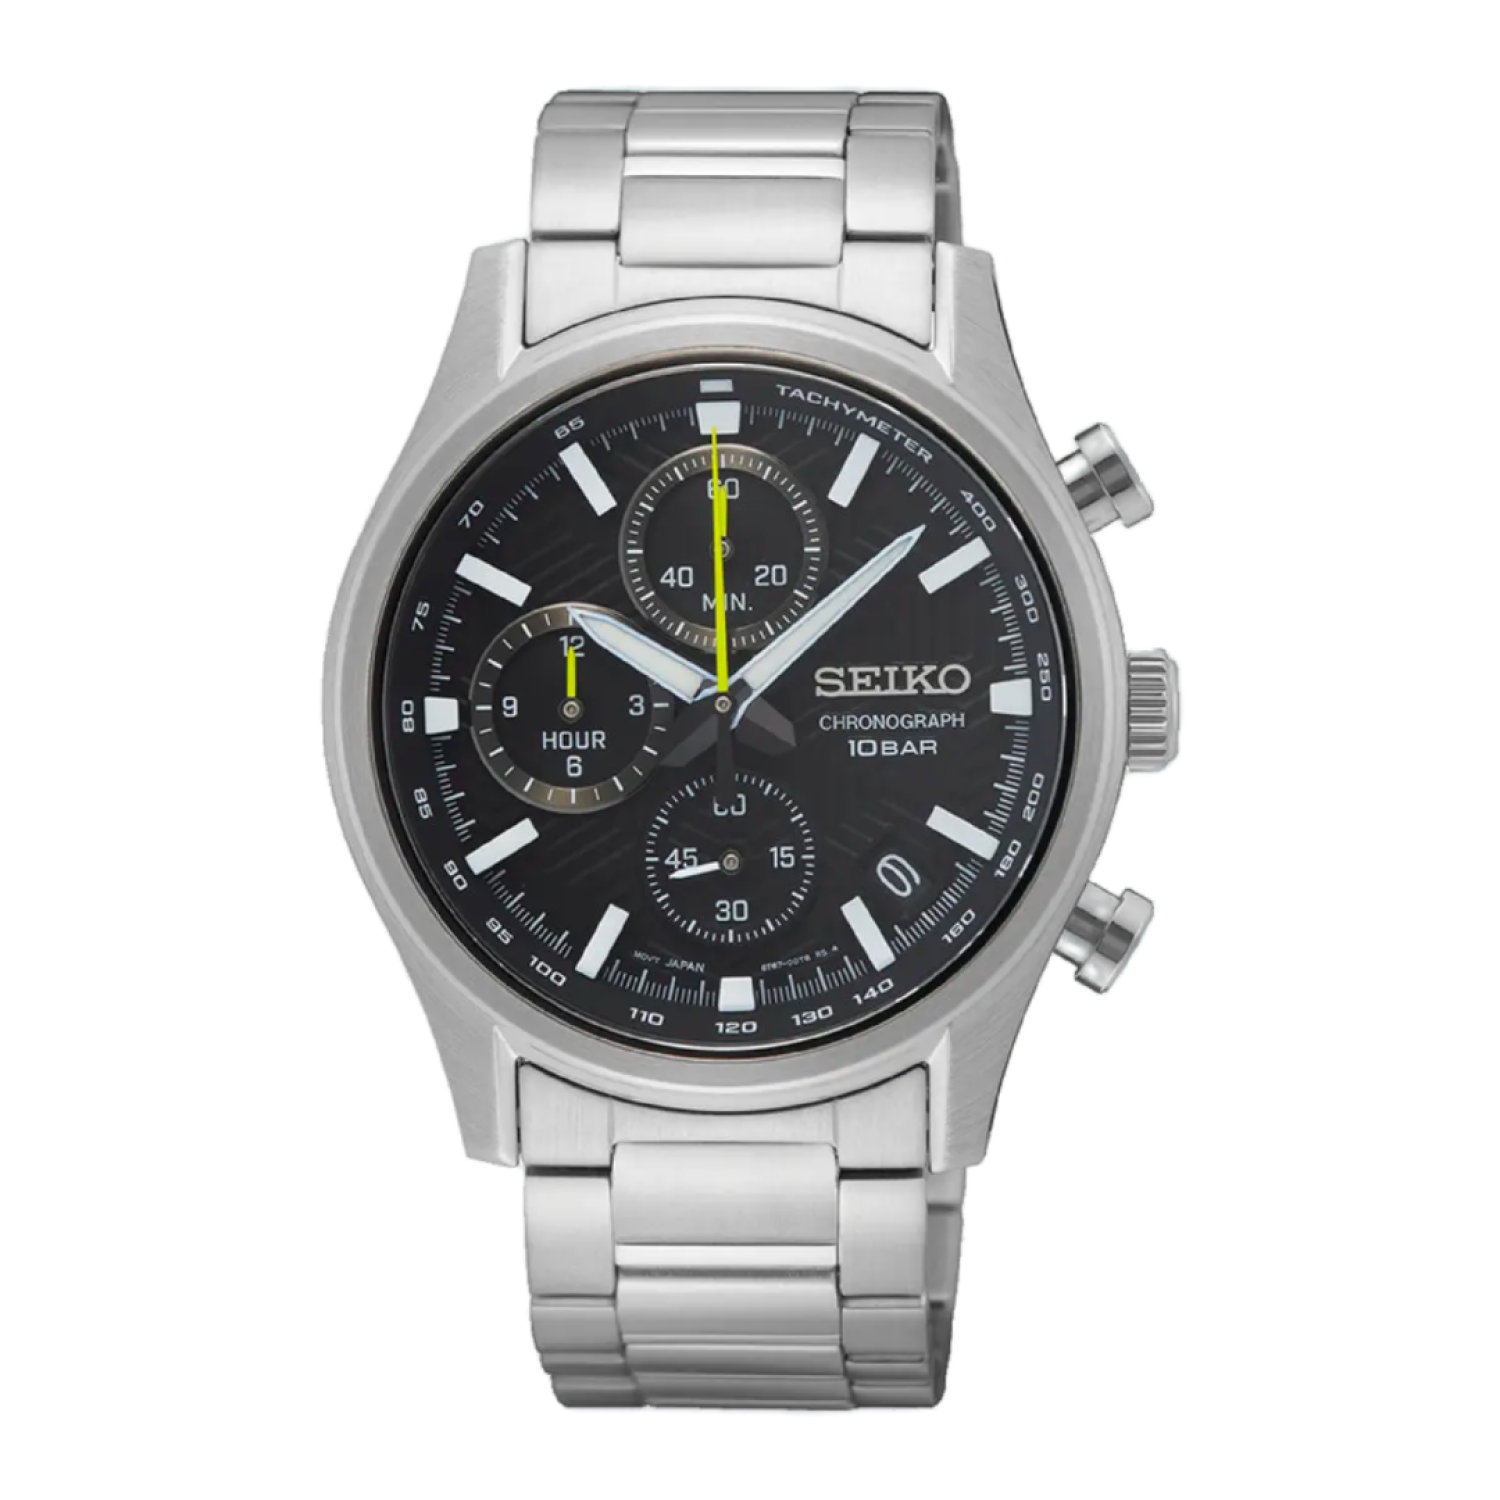 SSB419P1 Seiko Conceptual Chronograph Watch. SSB419P1 Seiko Conceptual Chronograph Watch. Embracing both classic and modern styling this men's watch from Seiko is a standout. This sports watch features a black chronograph face and nylon band. Afterpay sei